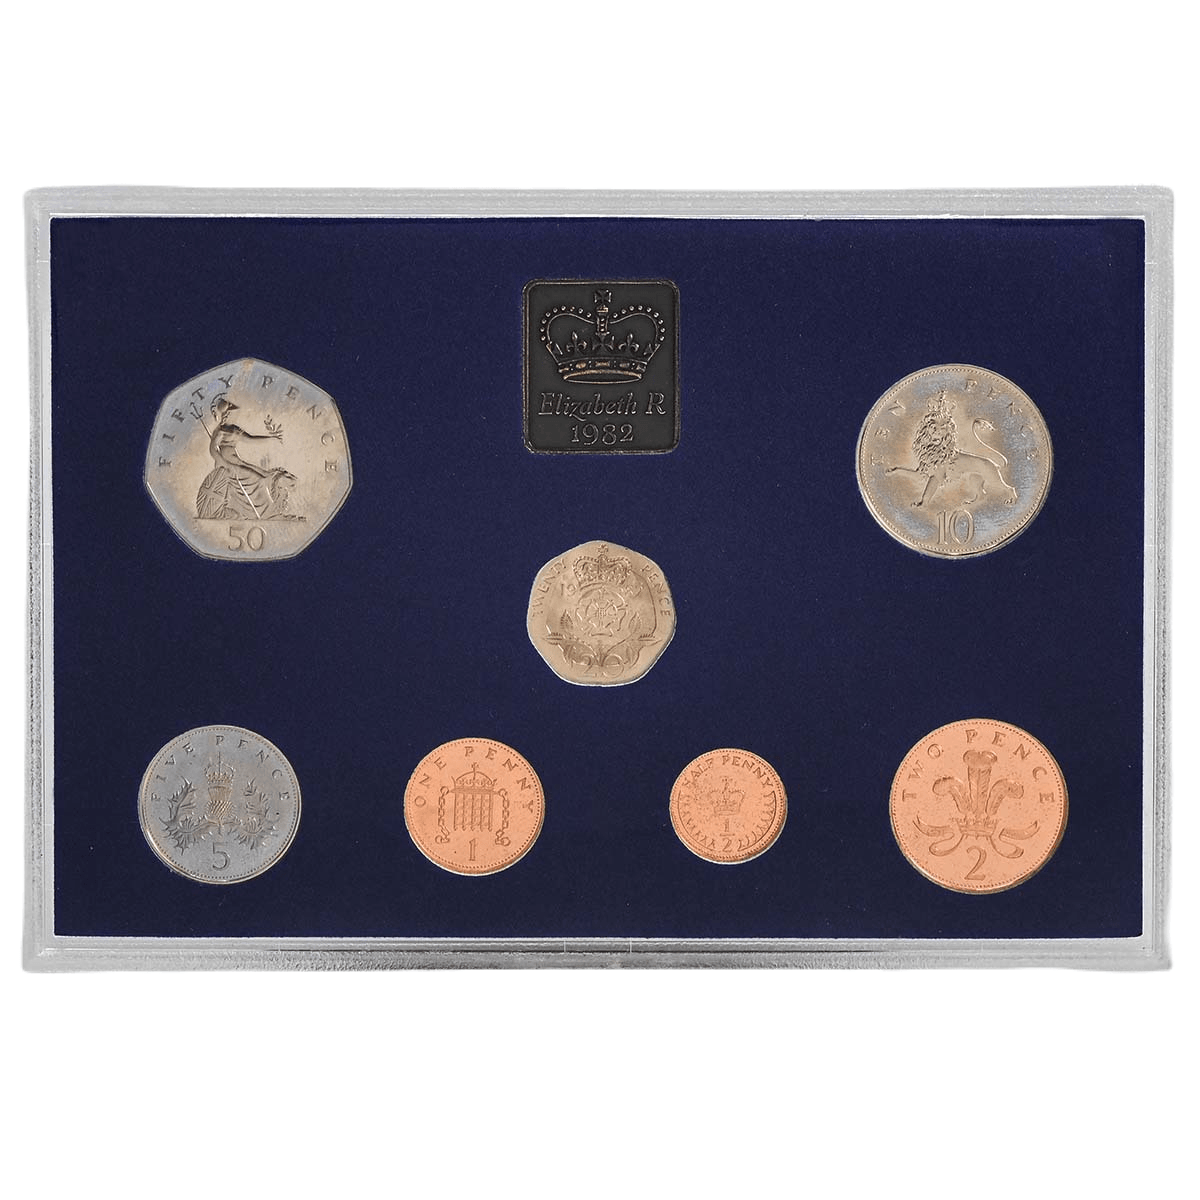 1982 UK Proof Annual 7 Coin Set - Loose Change Coins